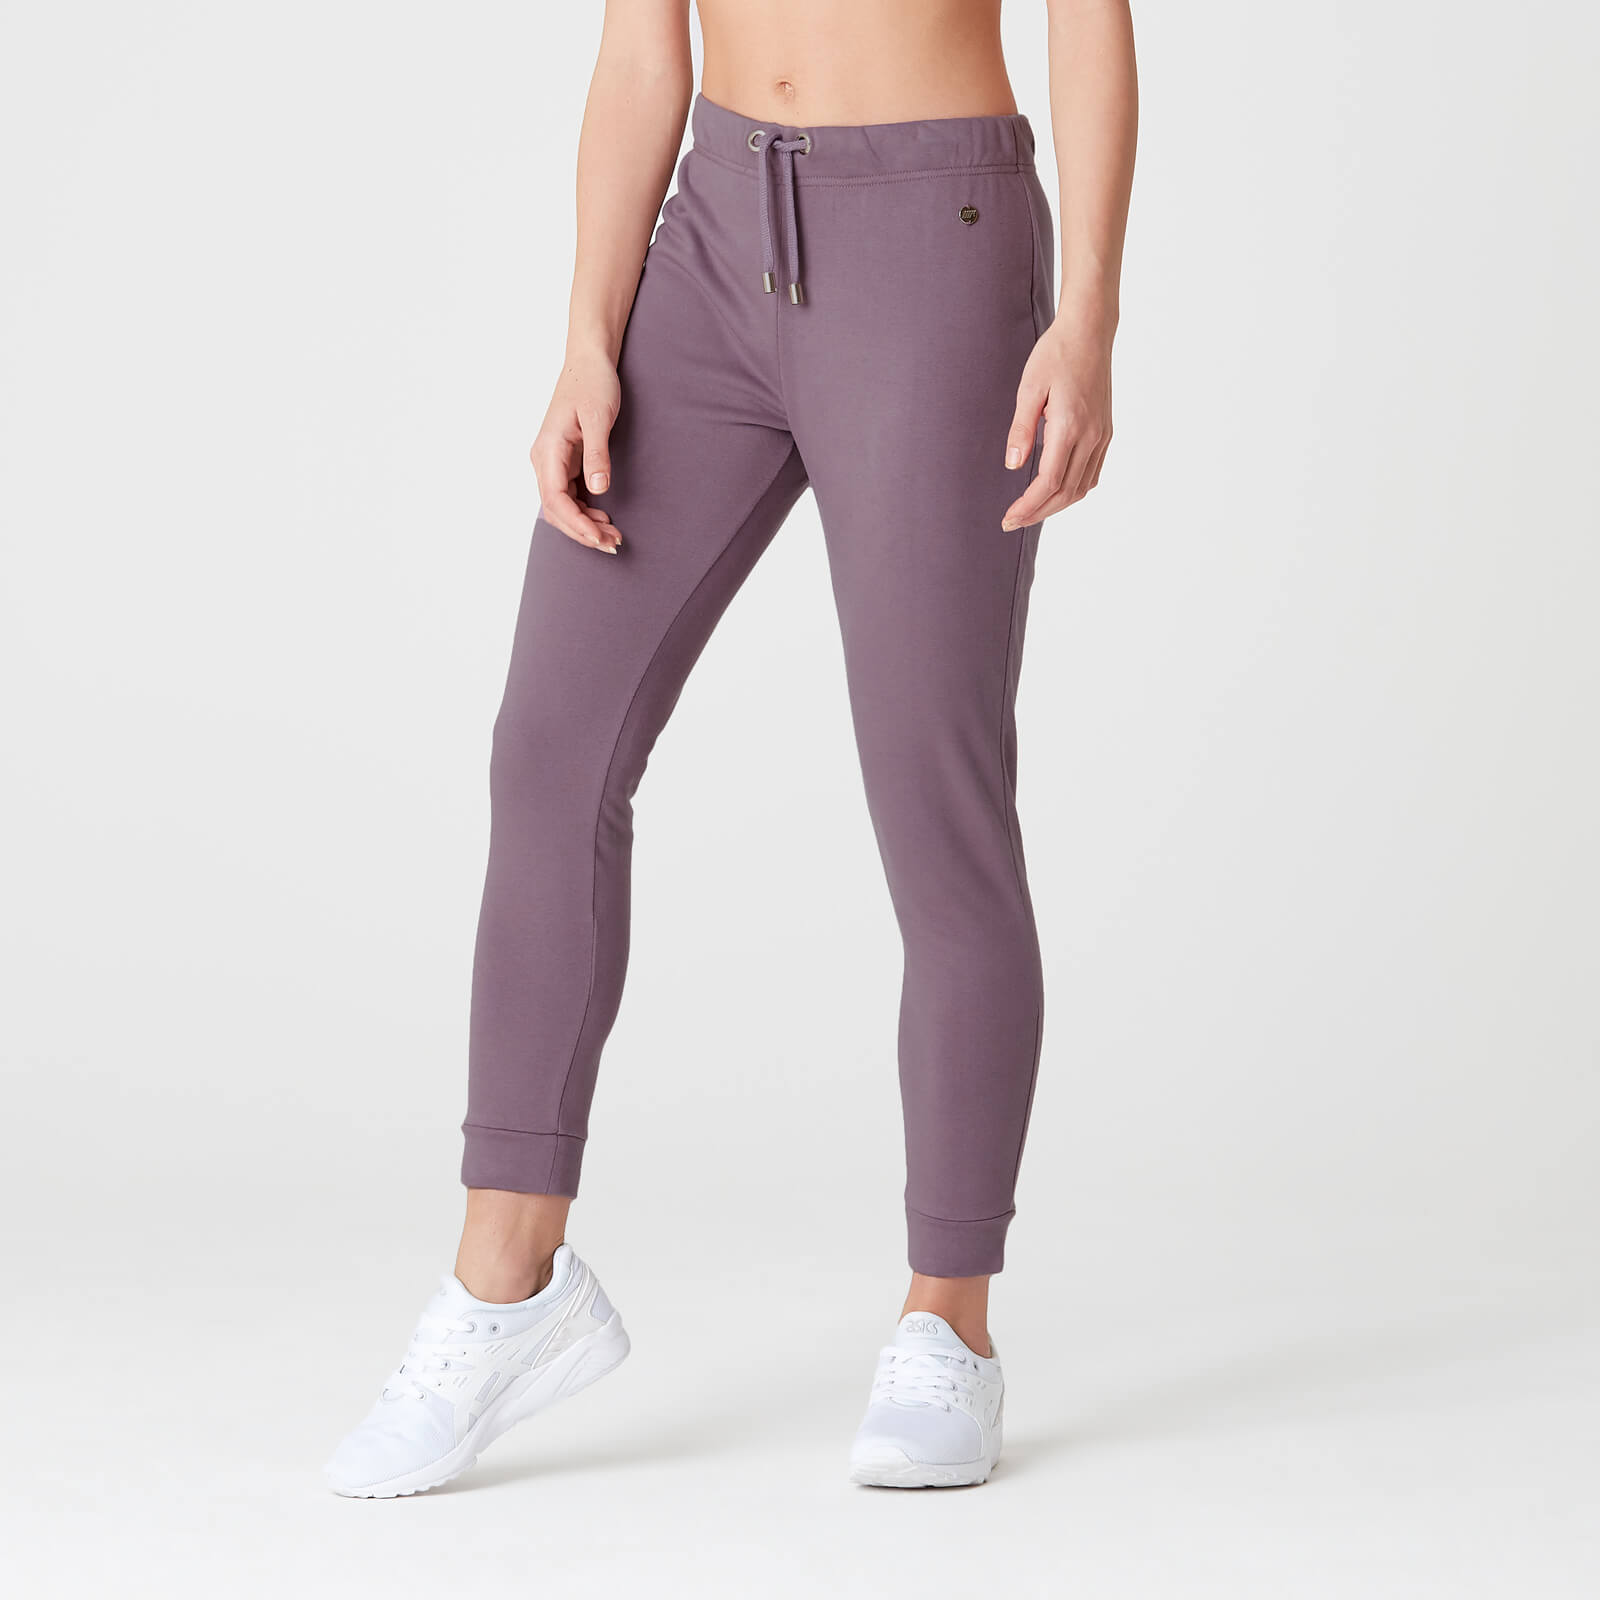 Myprotein Luxe Lounge Jogger - Mauve - XL